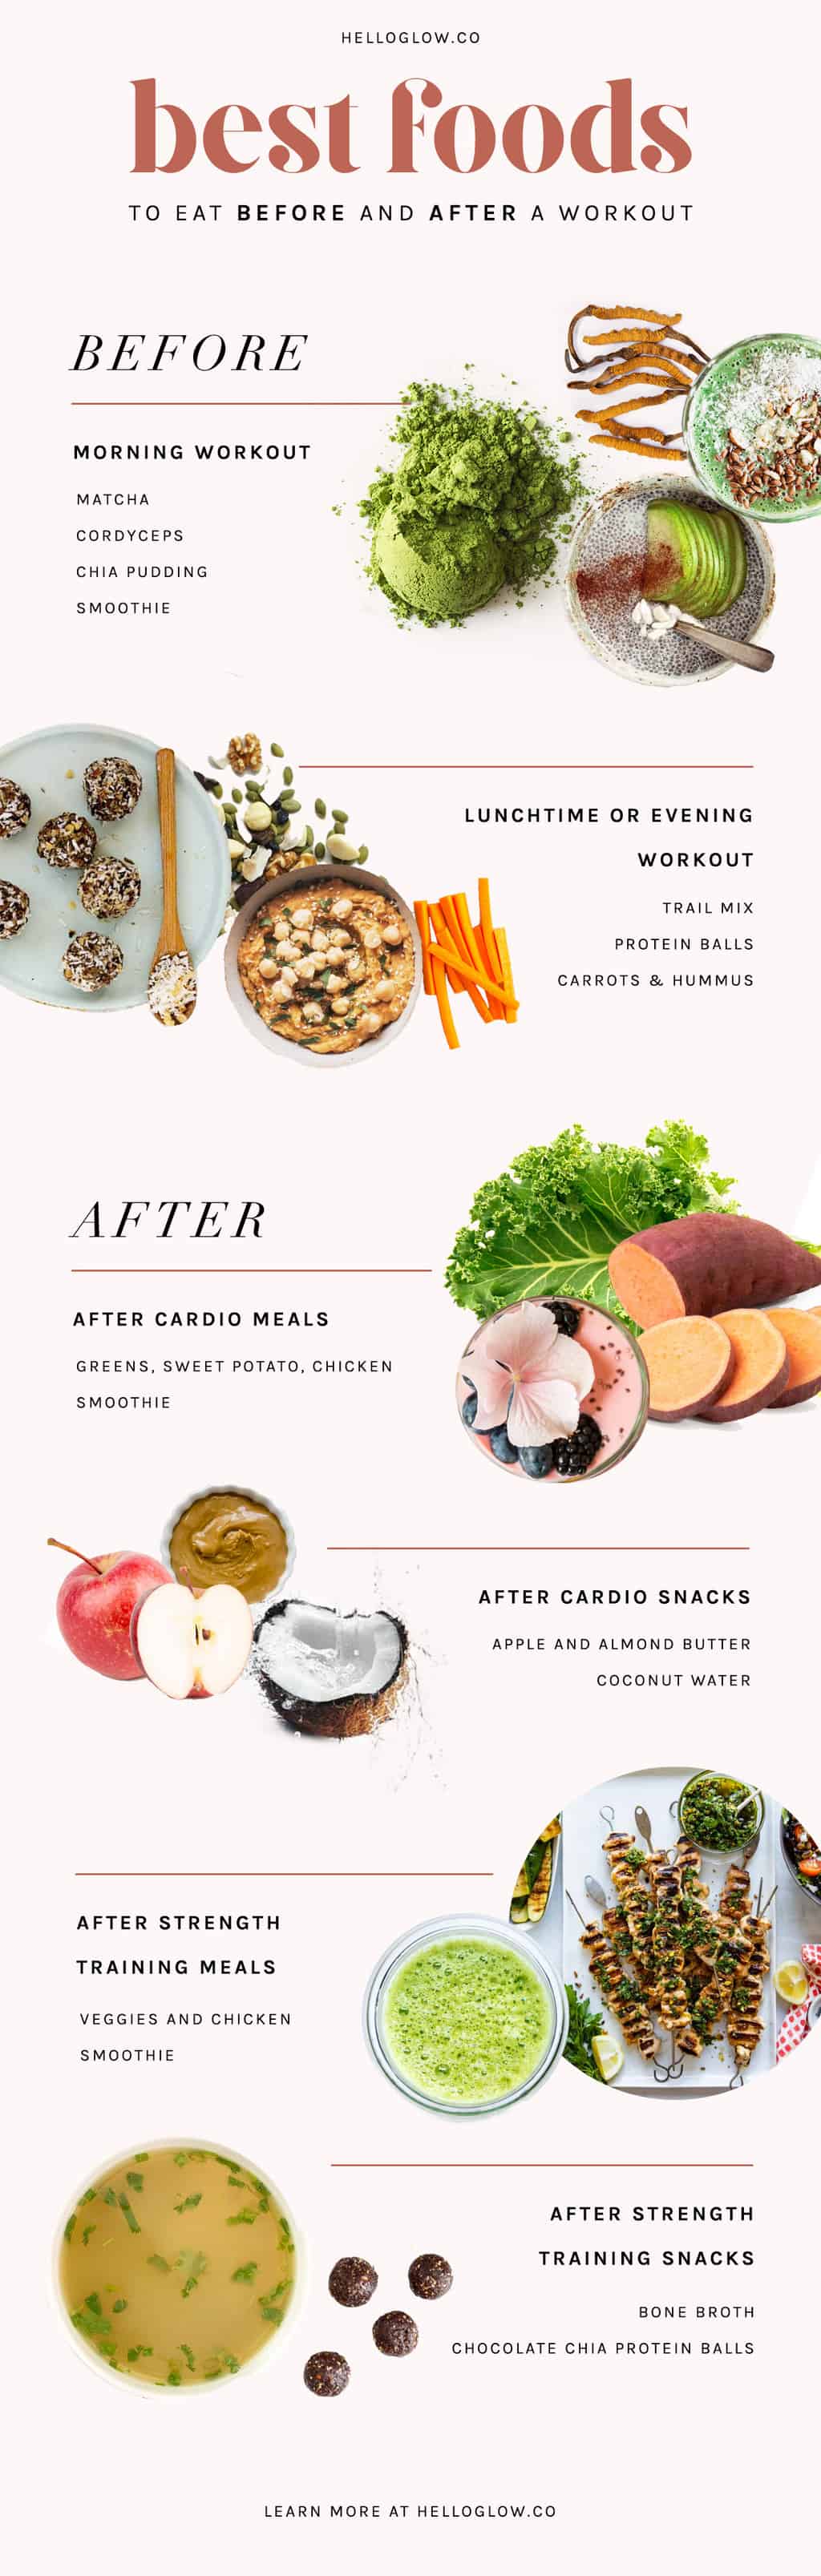 A Nutritionist Explains: What to Eat After a Workout | Hello Glow